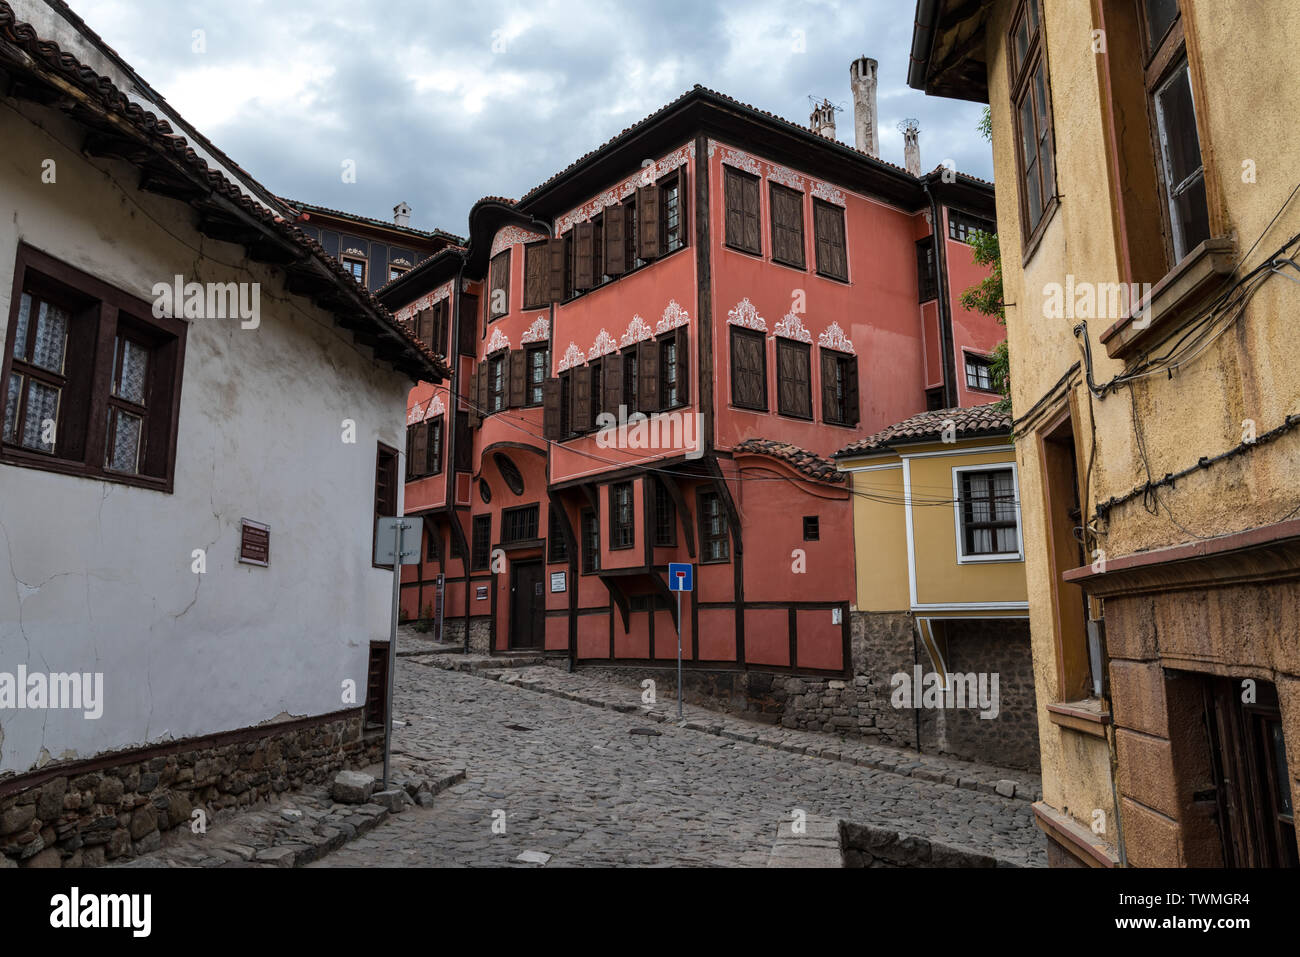 Plovdiv, Bulgaria - May 6, 2019: Typical architecture, historical medieval houses in Bulgaria. The Historical Museum of Plovdiv- Exhibition Renaissanc Stock Photo